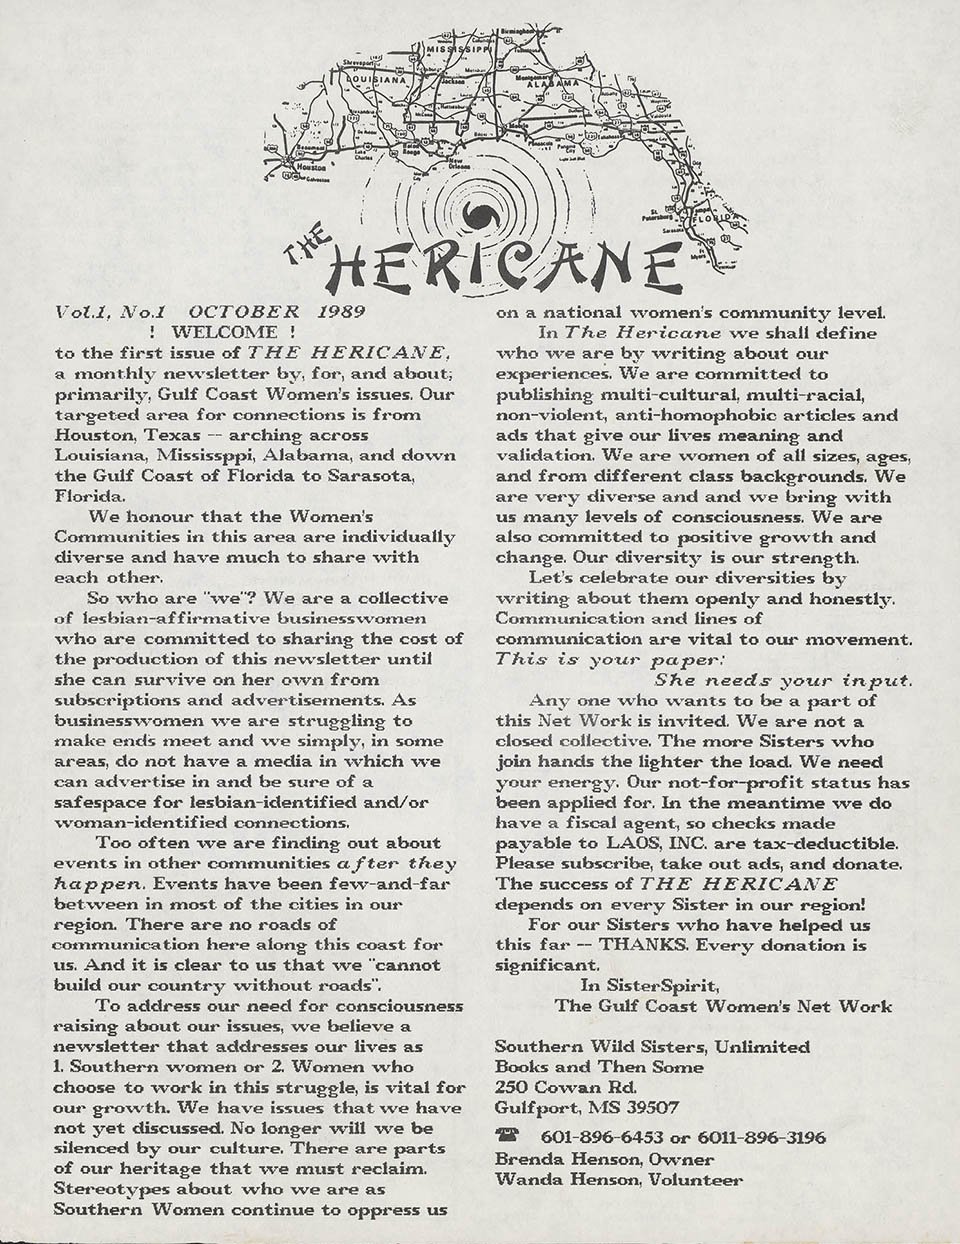 The cover of Hericane Volume 1, October 1989